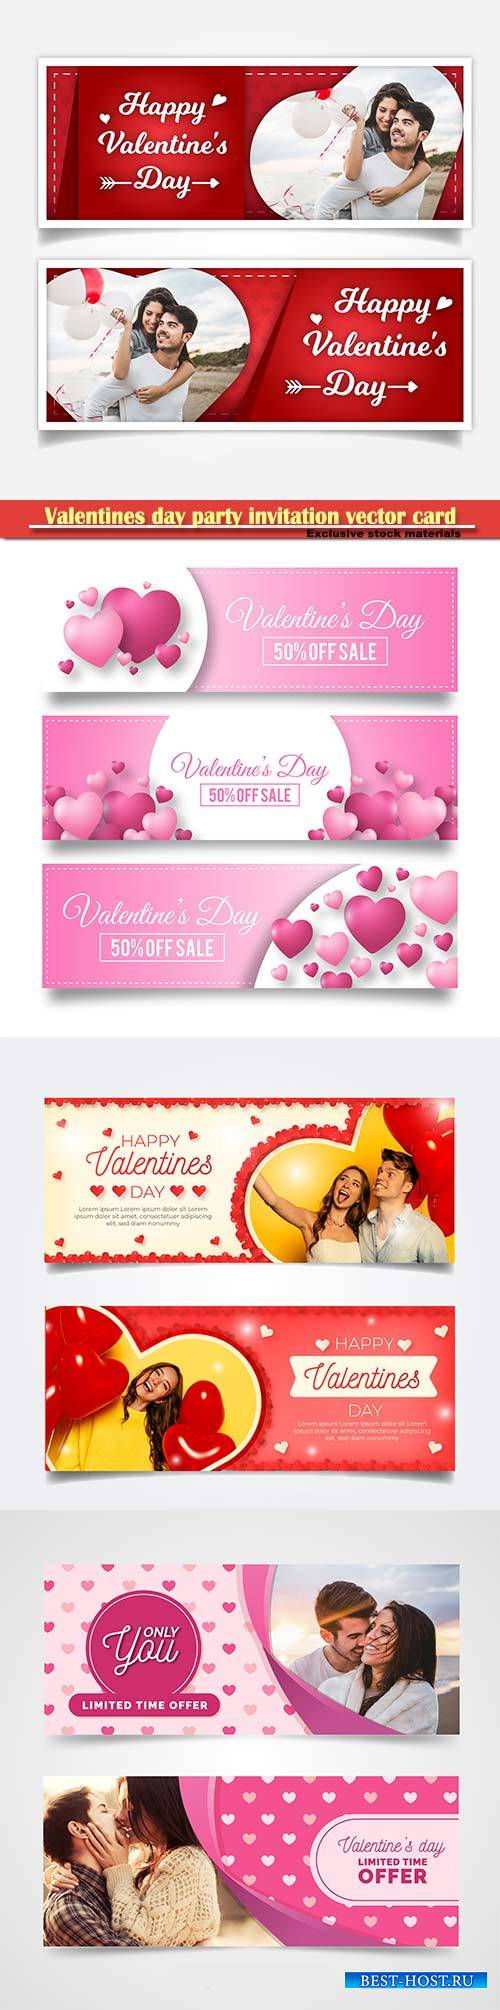 Valentines day party invitation vector card # 54